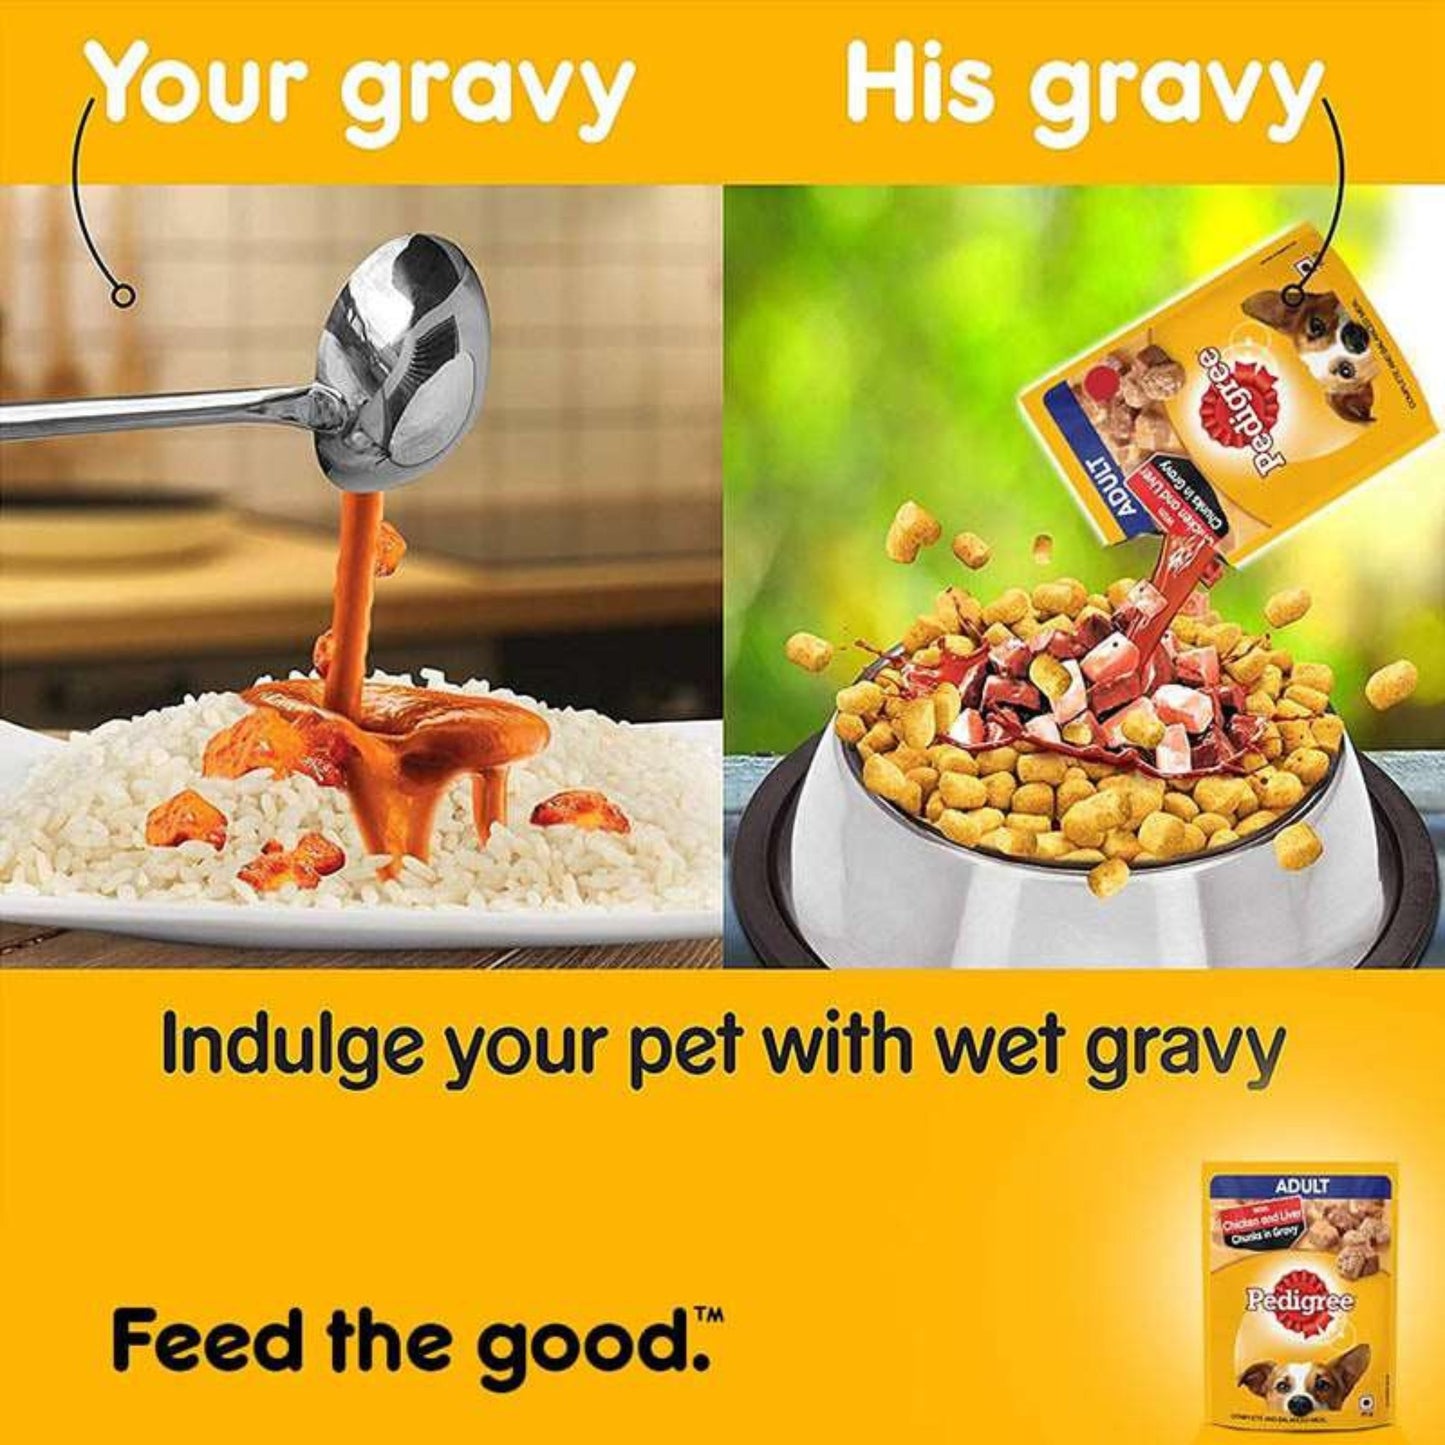 Pedigree Adult Dog Food, Chicken and liver Chunks in Gravy, Pack of 15